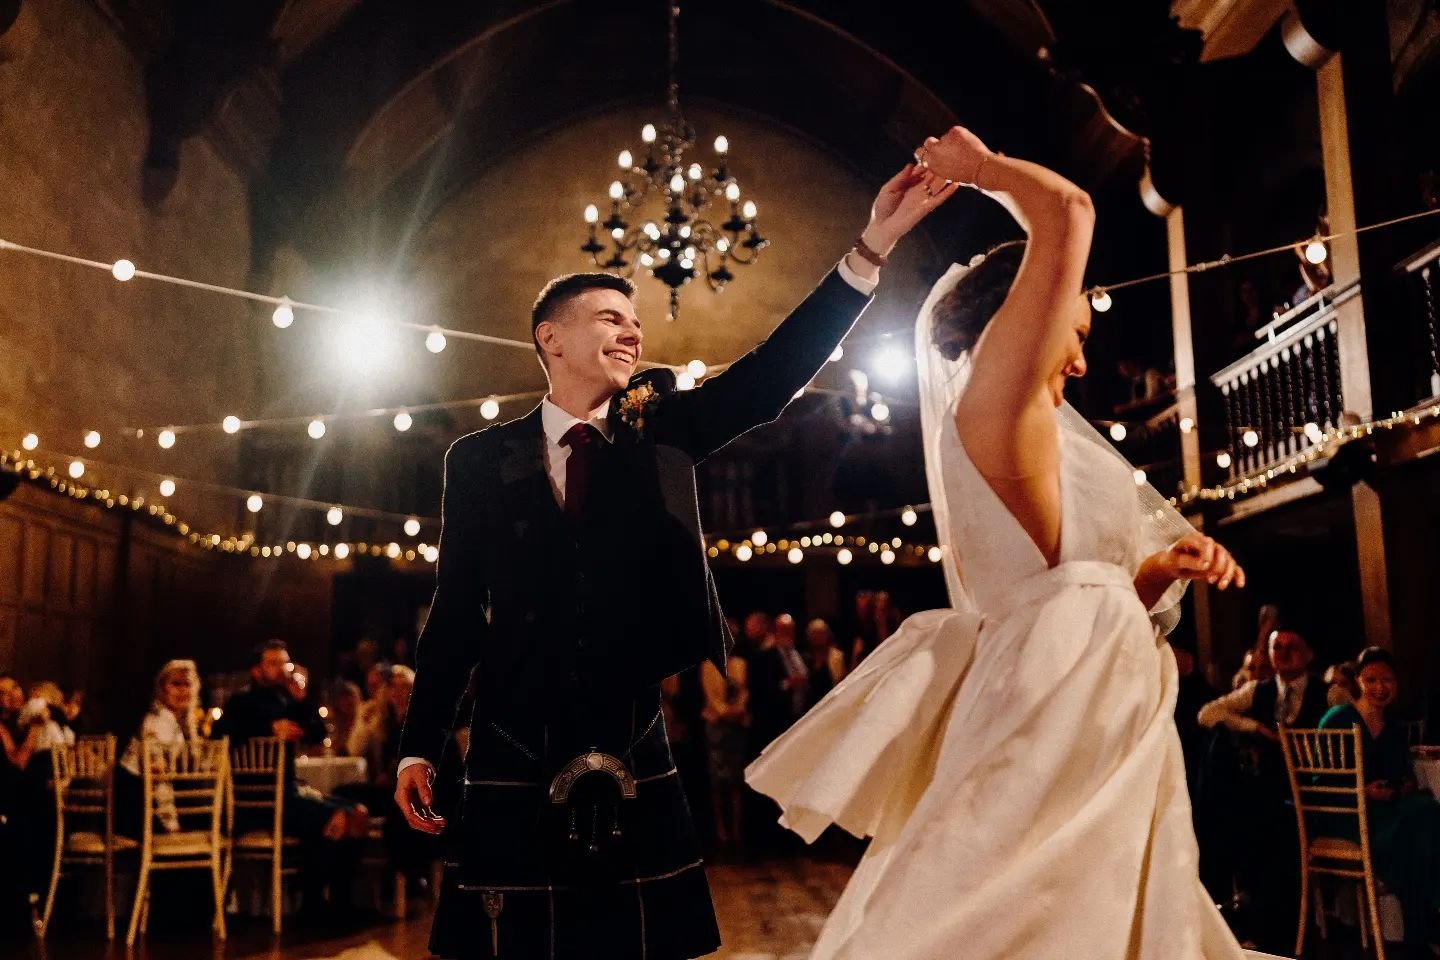 Corrie and Grants reception in one of the most stunning rooms in Scotland @achnagairncastle . 

#achnagairncastle #achnagairnestate #achnagairnwedding #weddinghotographerscotland #achnagairnwedding #luxuryweddingscotland